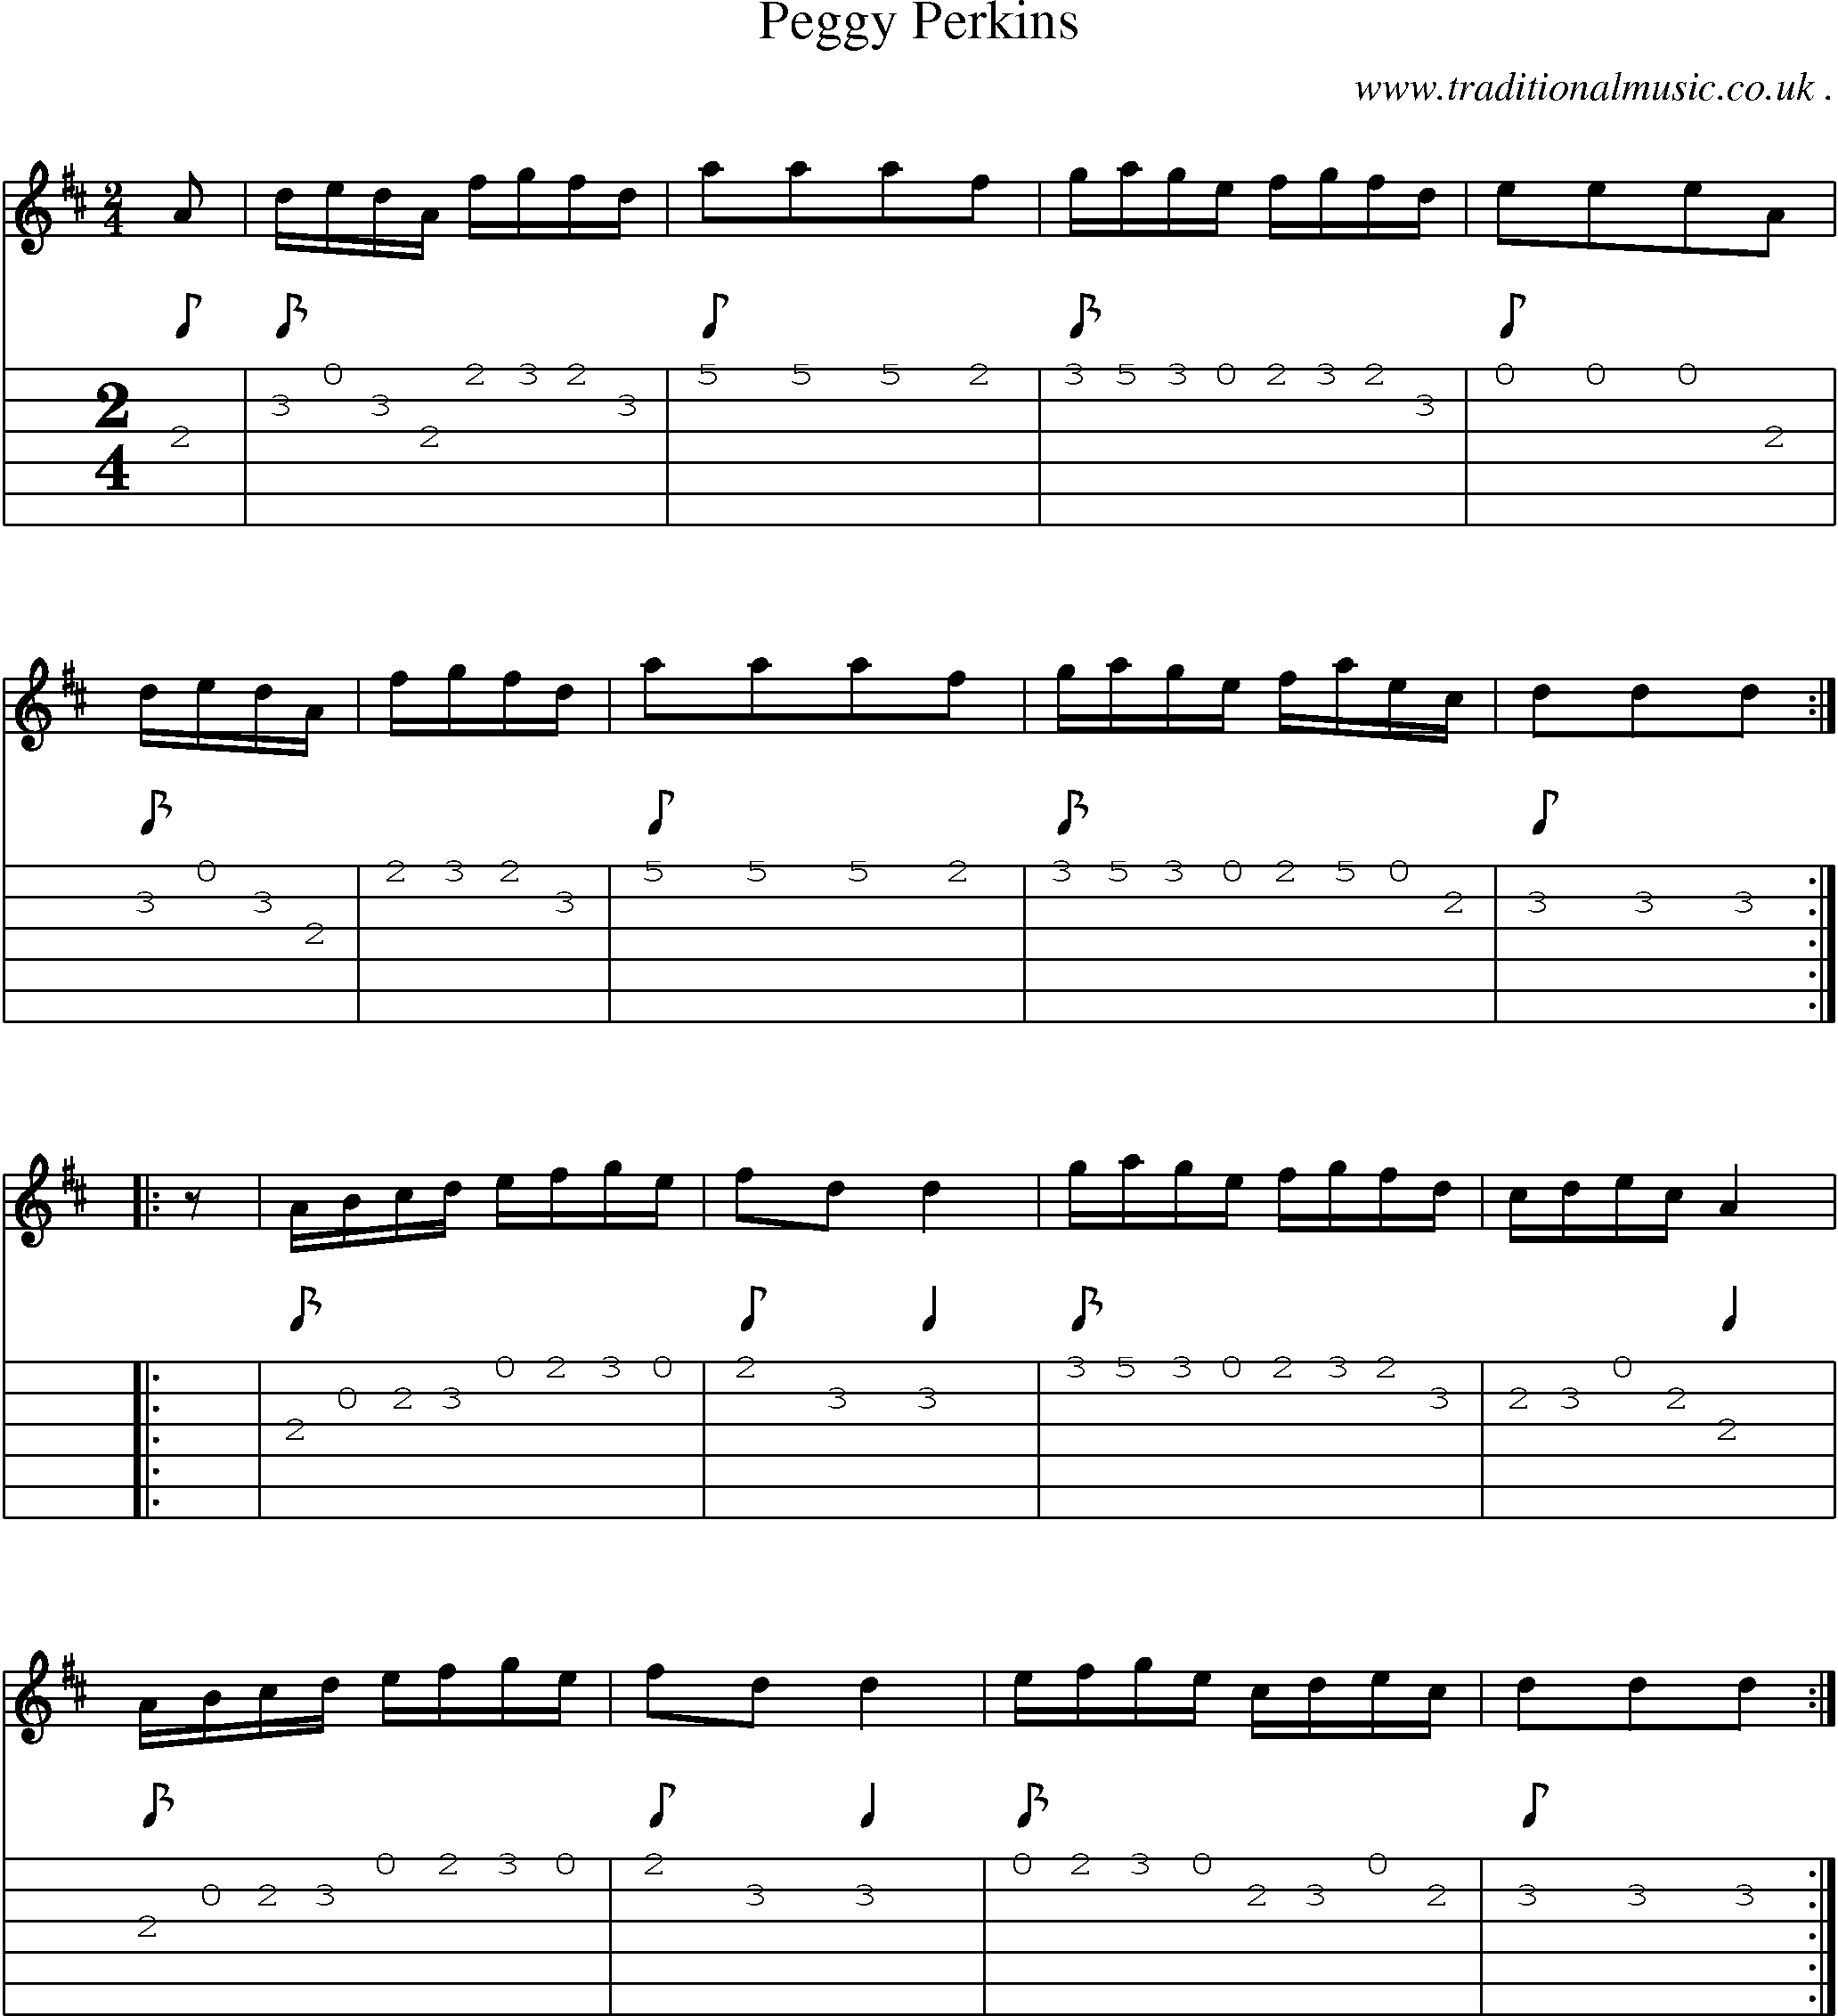 Sheet-Music and Guitar Tabs for Peggy Perkins